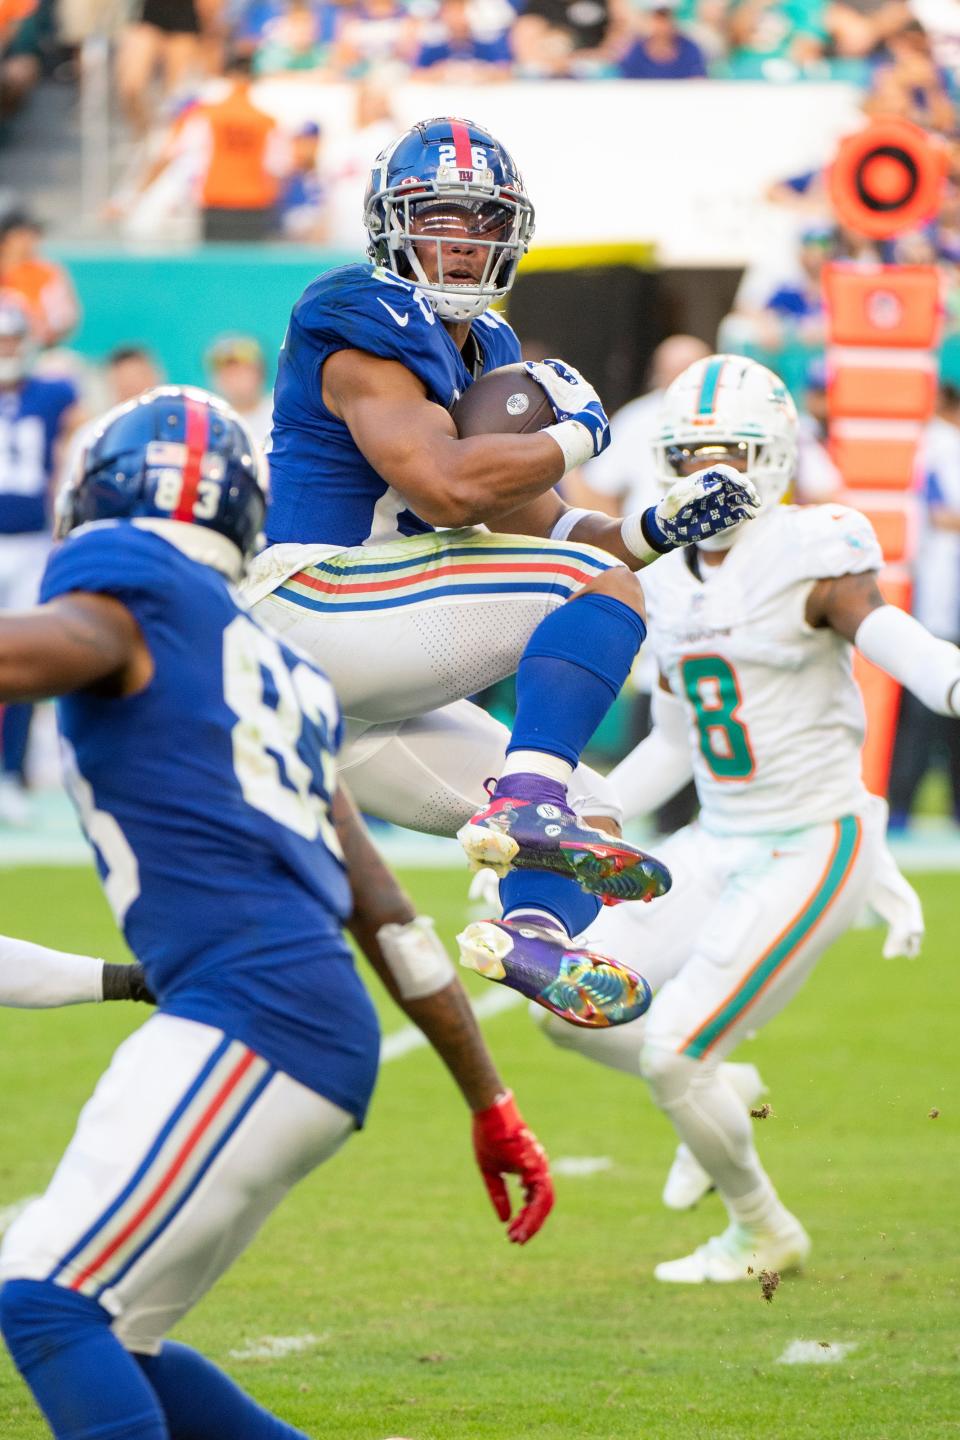 New York Giants running back Saquon Barkley (26) jumps and spins in the air as he rushes with the football during an NFL football game against the Miami Dolphins, Sunday, Dec. 5, 2021, in Miami Gardens, Fla. (AP Photo/Doug Murray)